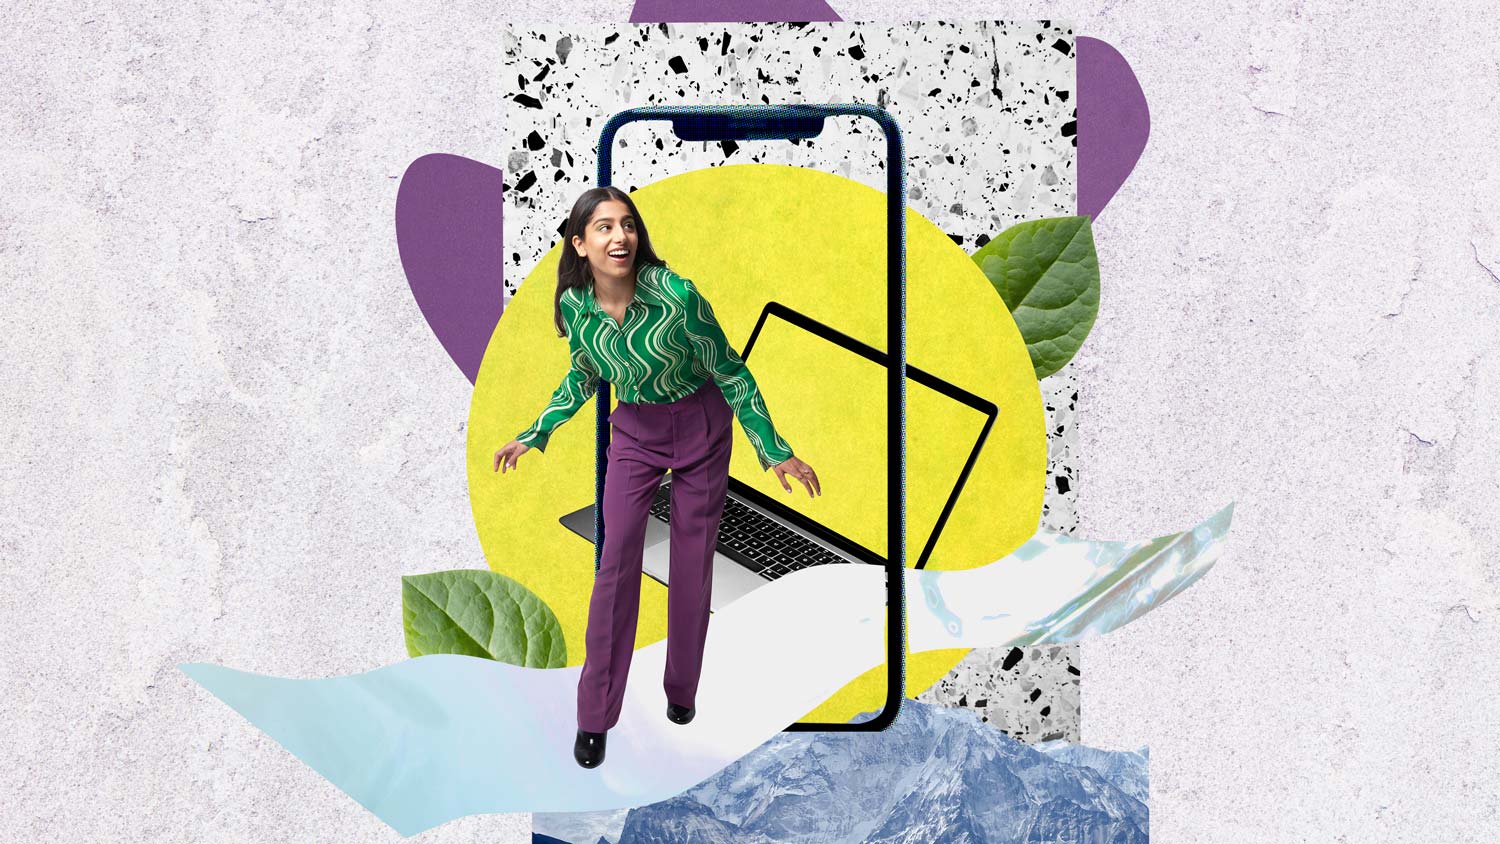 Collage image of woman stepping out of the digital world into the real world